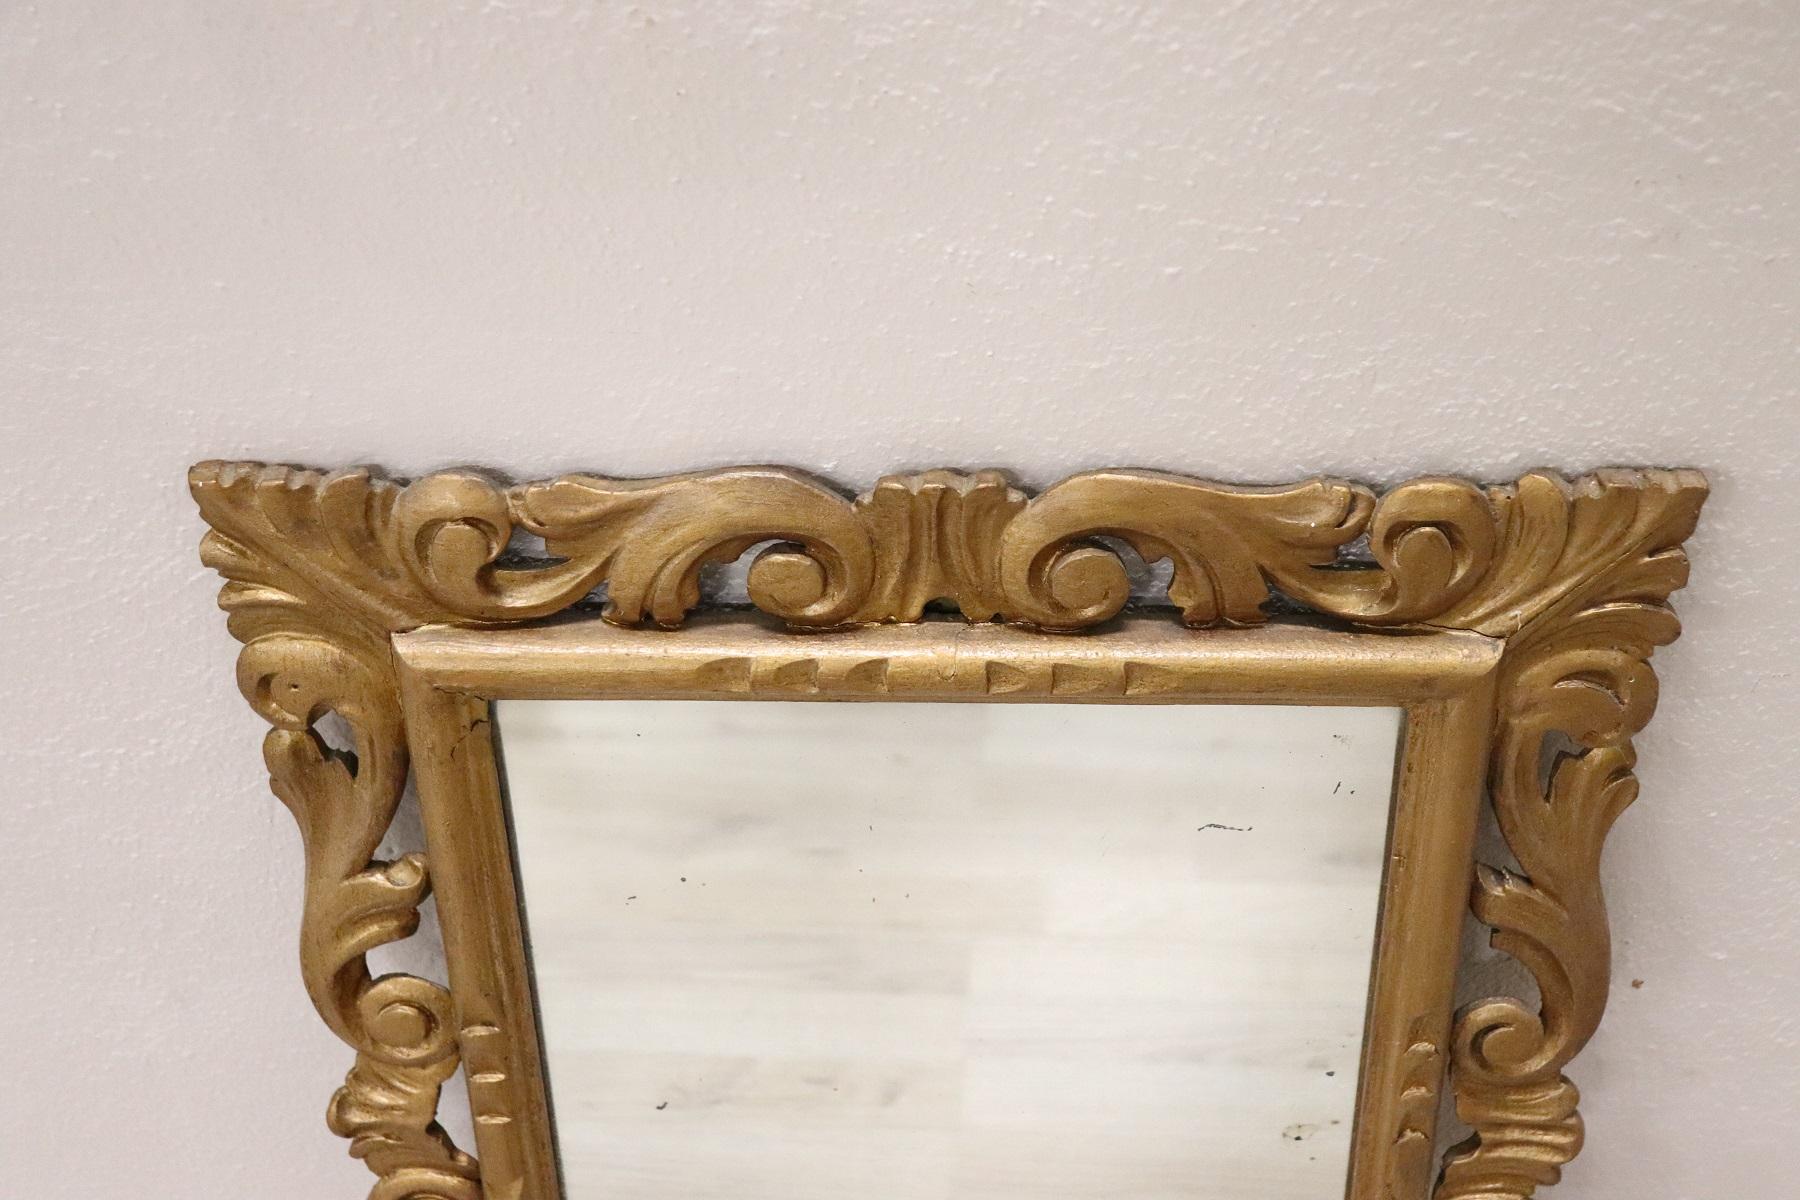 Refined Italian Baroque style small mirror with frame in carved and gilded wood 1950s. Conditions good.